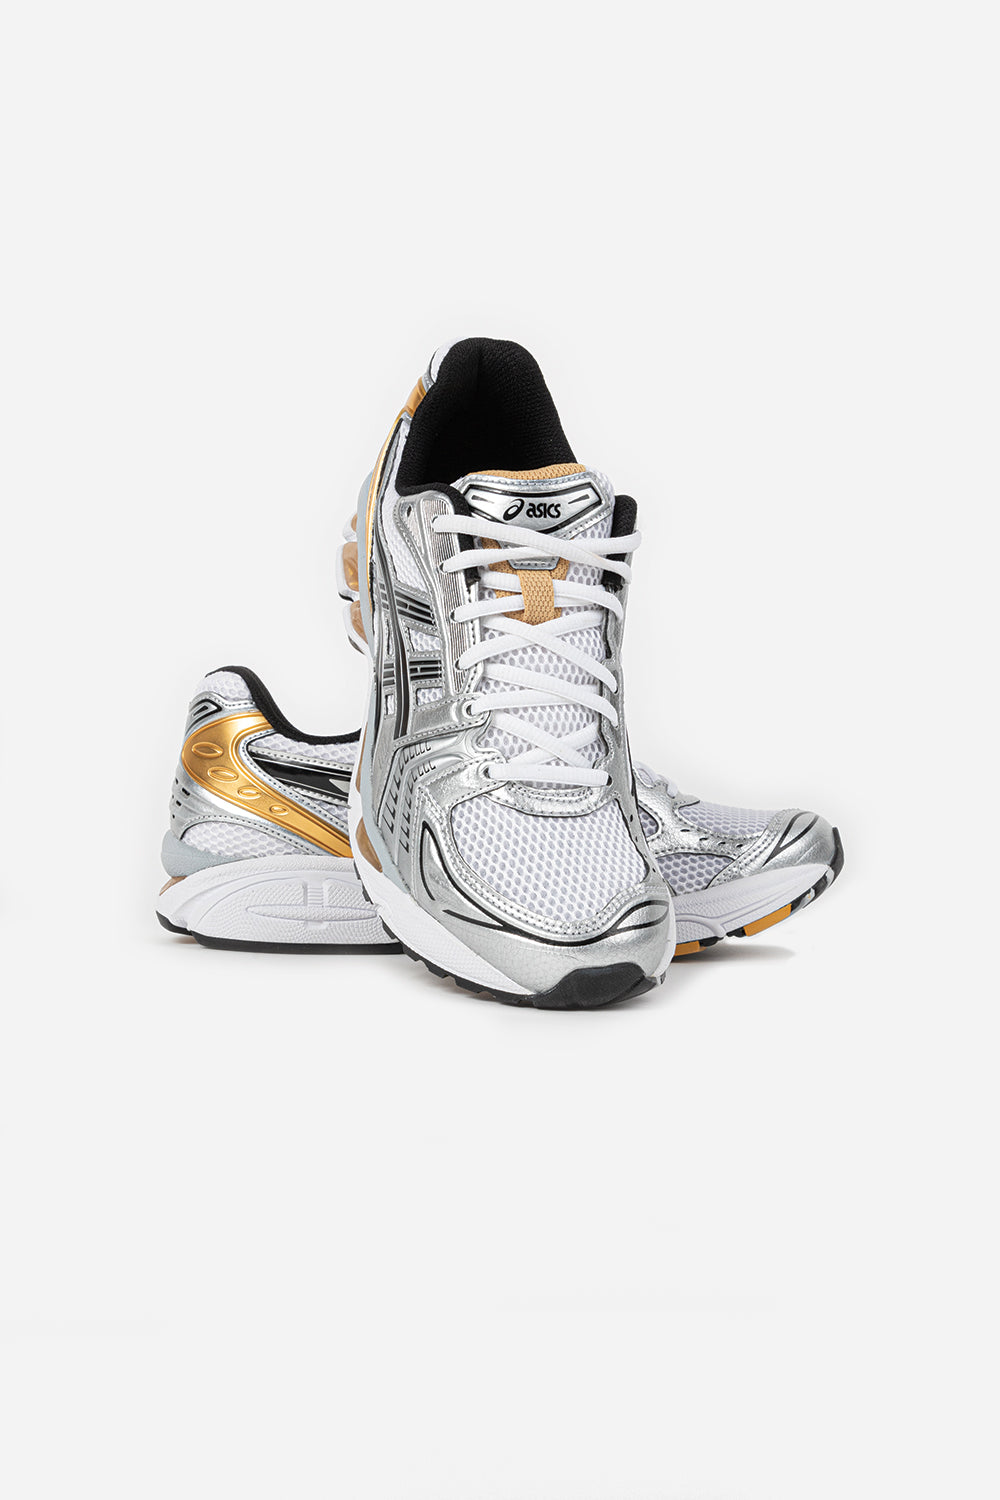 Asics Gel Kayano 14 in White & Pure Gold - Wallace Mercantile Shop